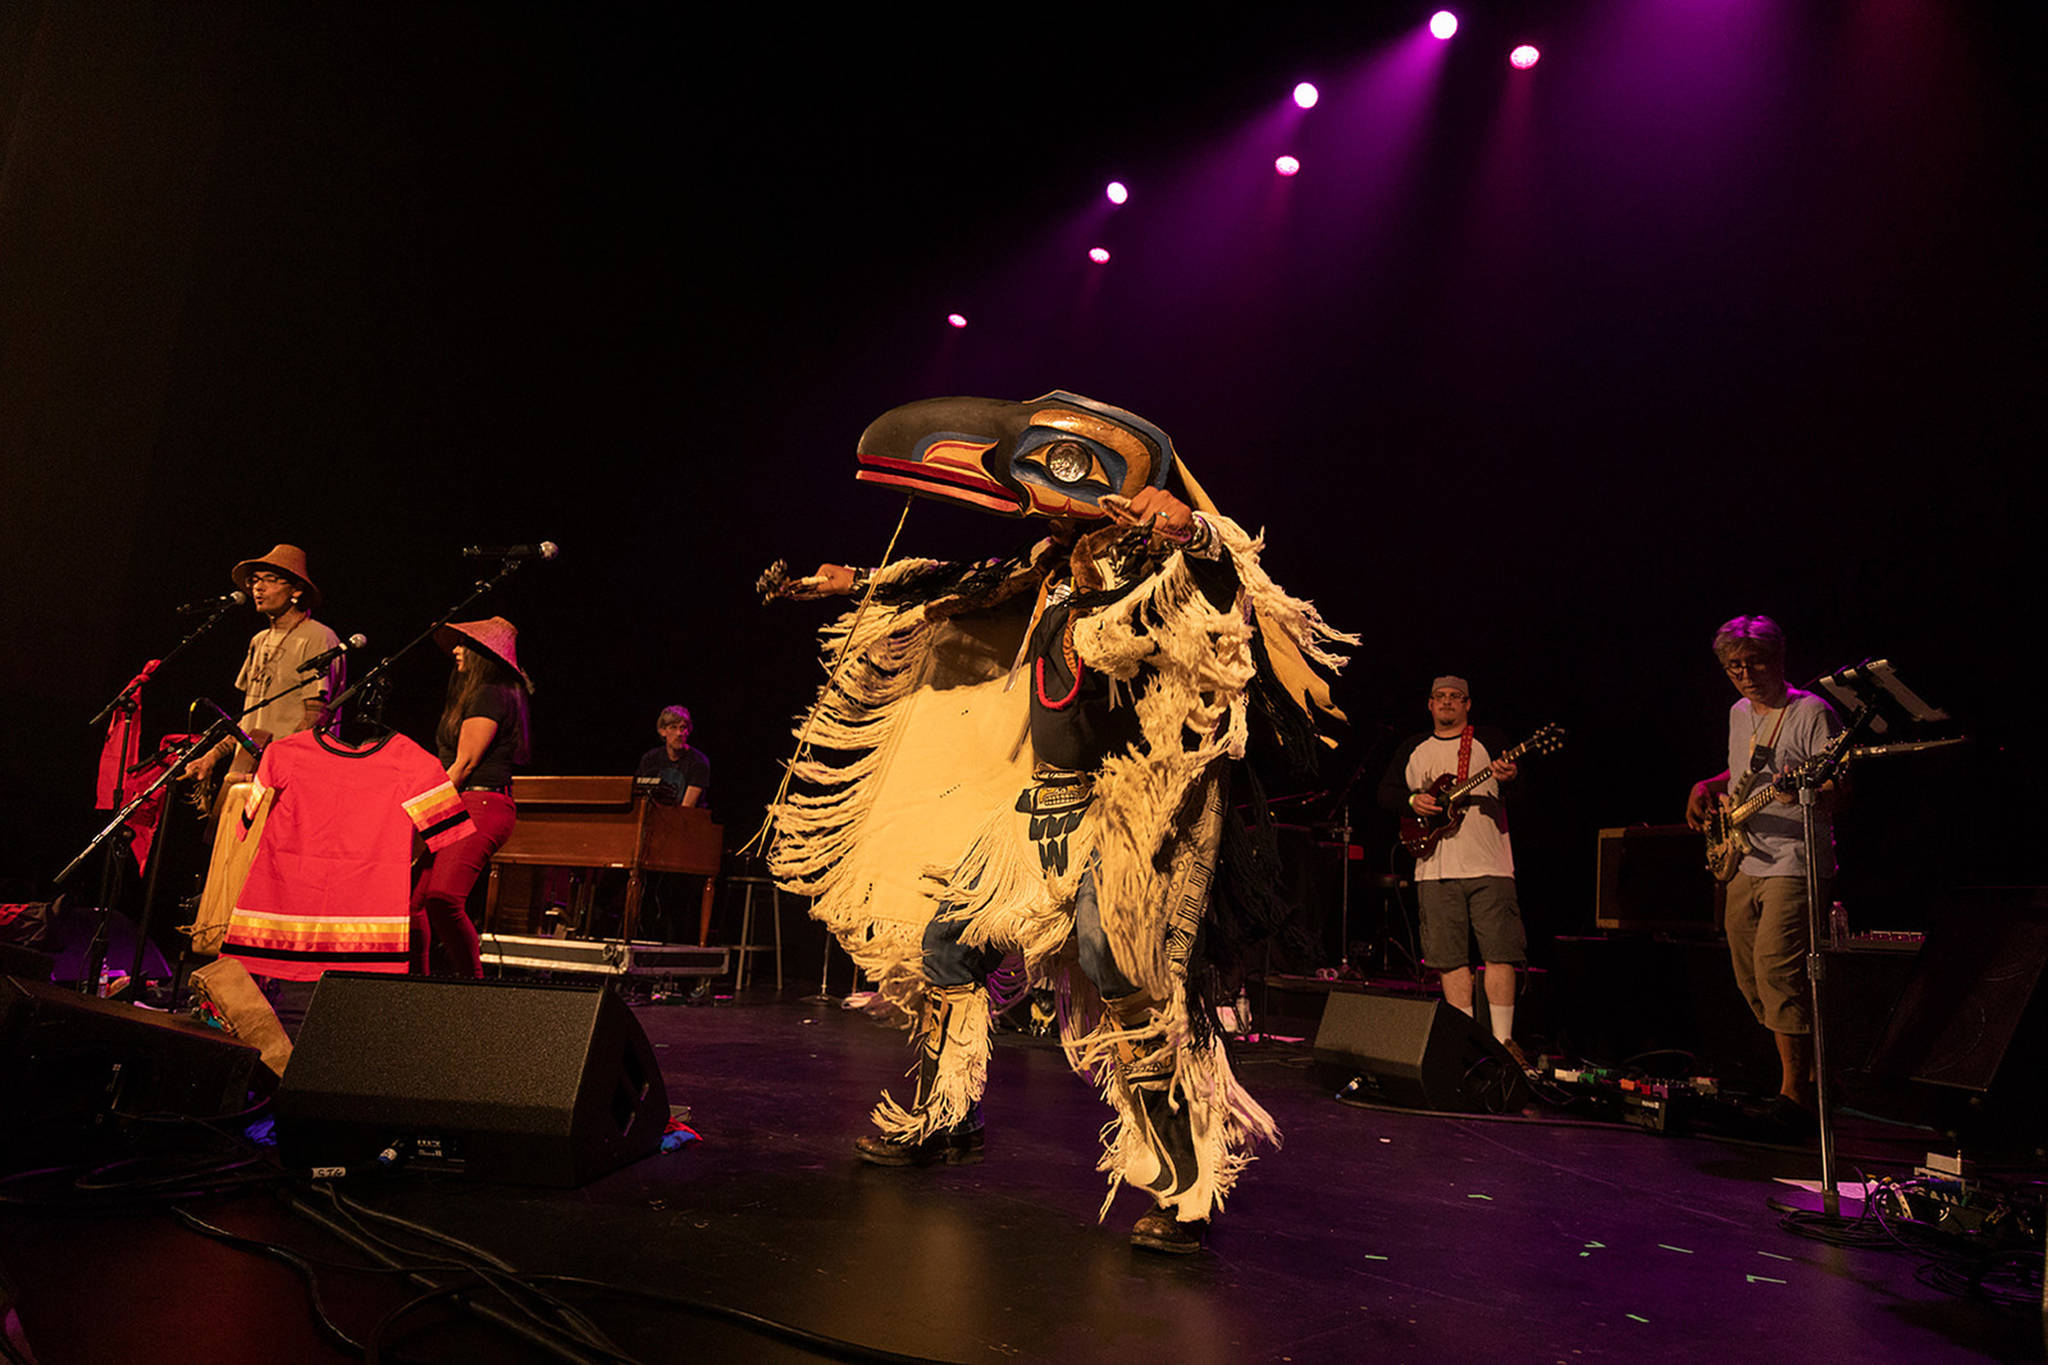 What do you get when you cross Alaska Native culture with Parliament Funkadelic?